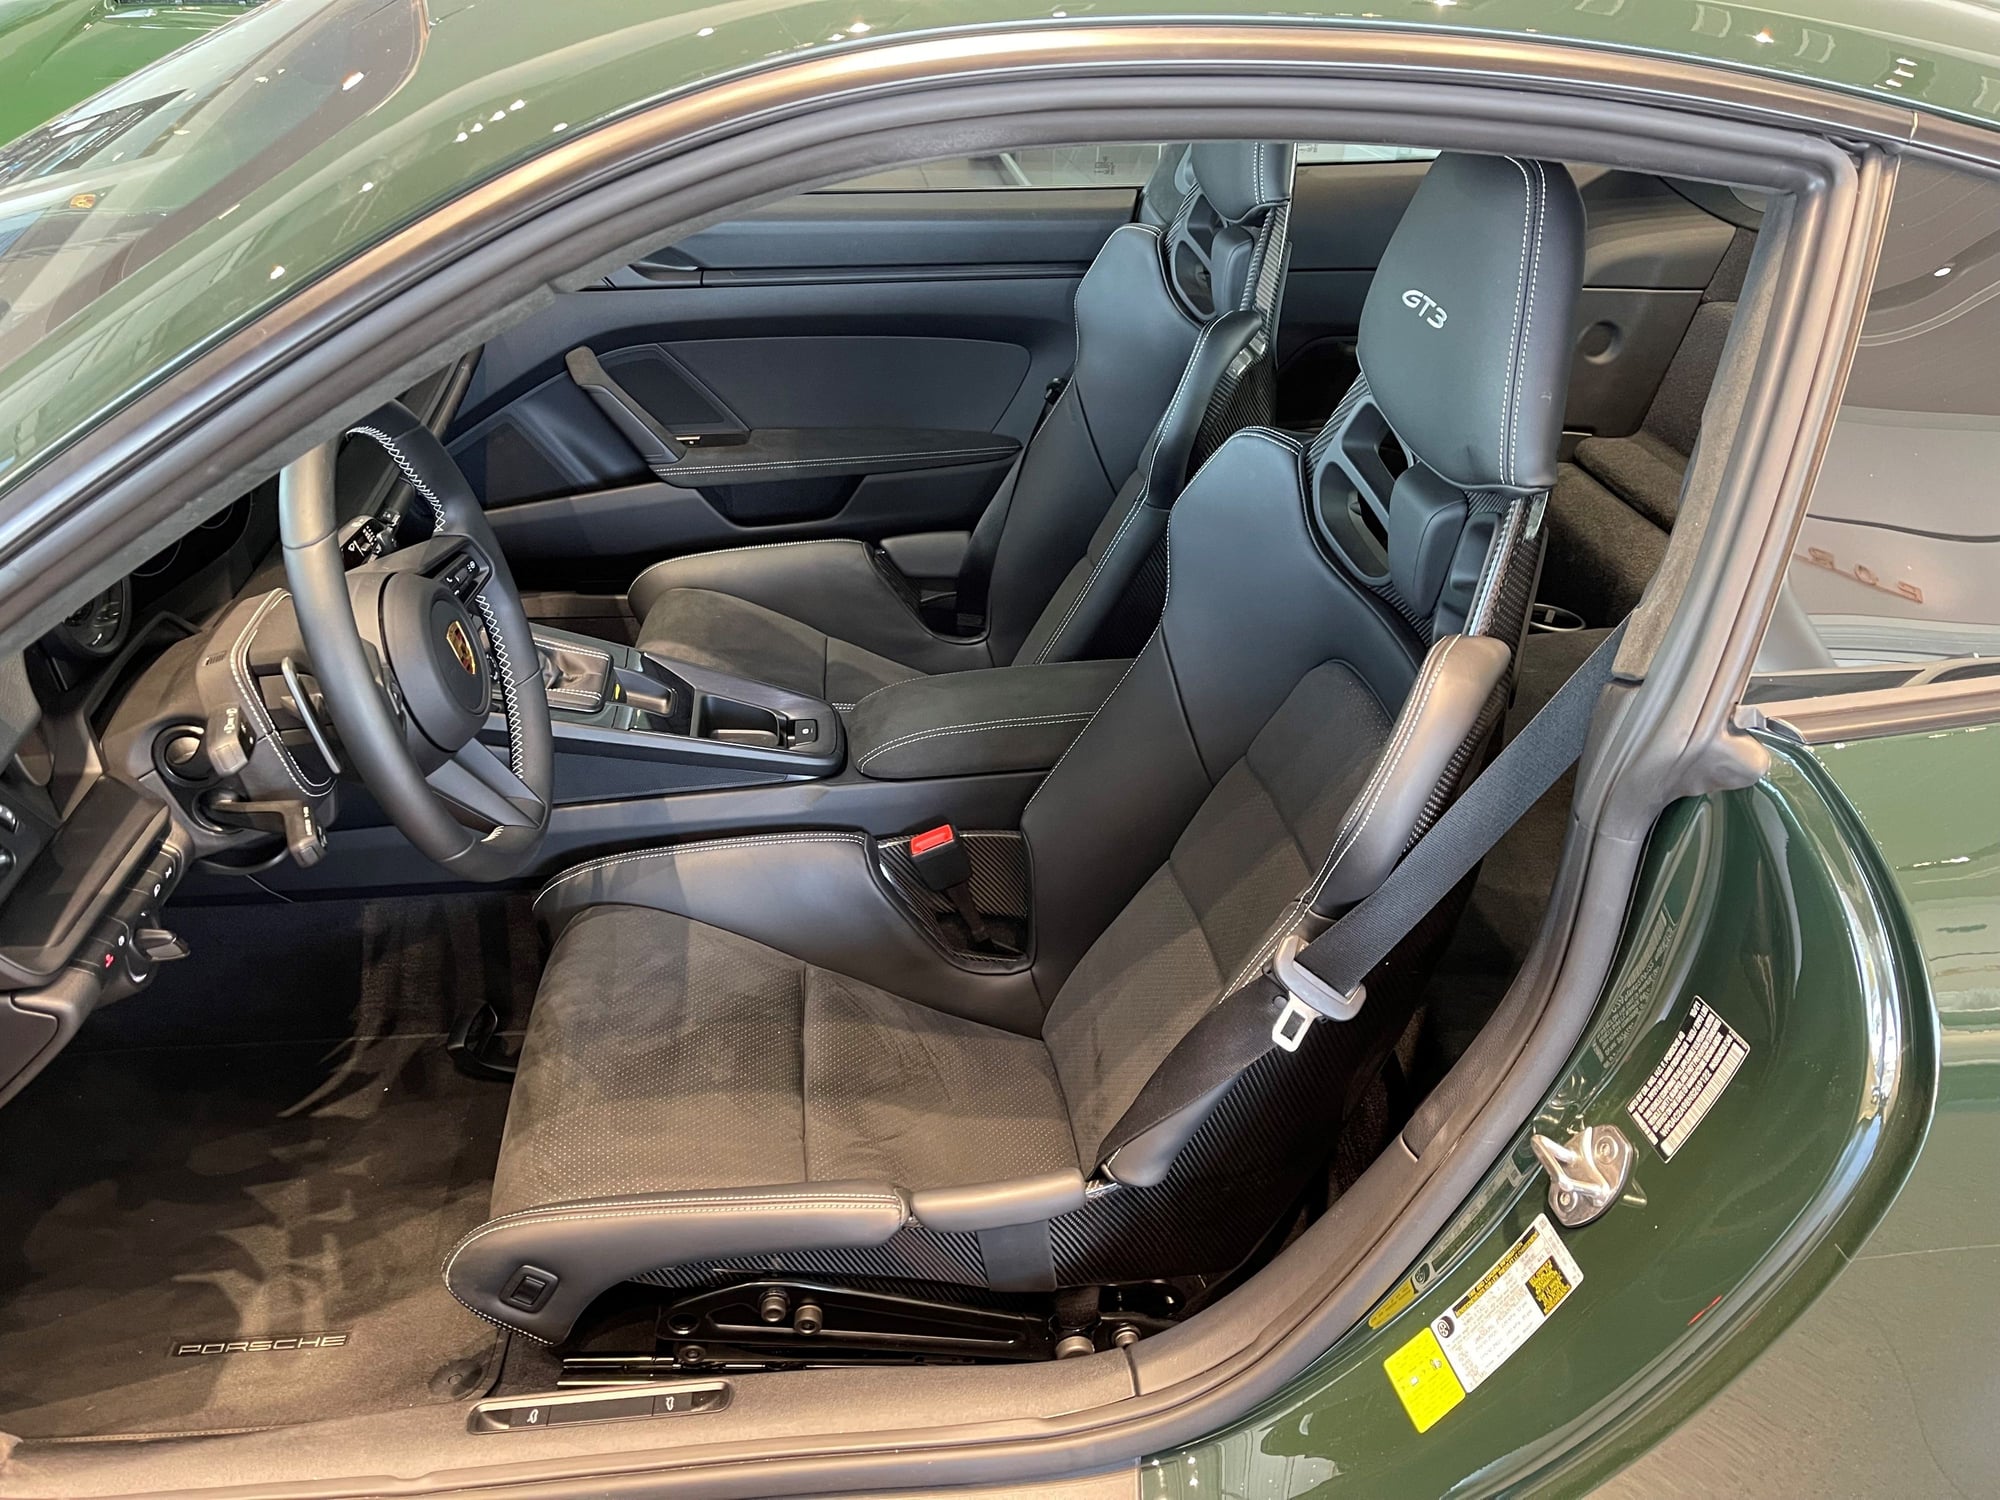 2022 Porsche 911 - 2022 Brewster Green GT3! Well Equipped! 400 miles! CPO. Wholesale PRICE! - Used - VIN WP0AC2A98NS269122 - 400 Miles - 6 cyl - 2WD - Automatic - Coupe - Other - Tucson, AZ 85711, United States